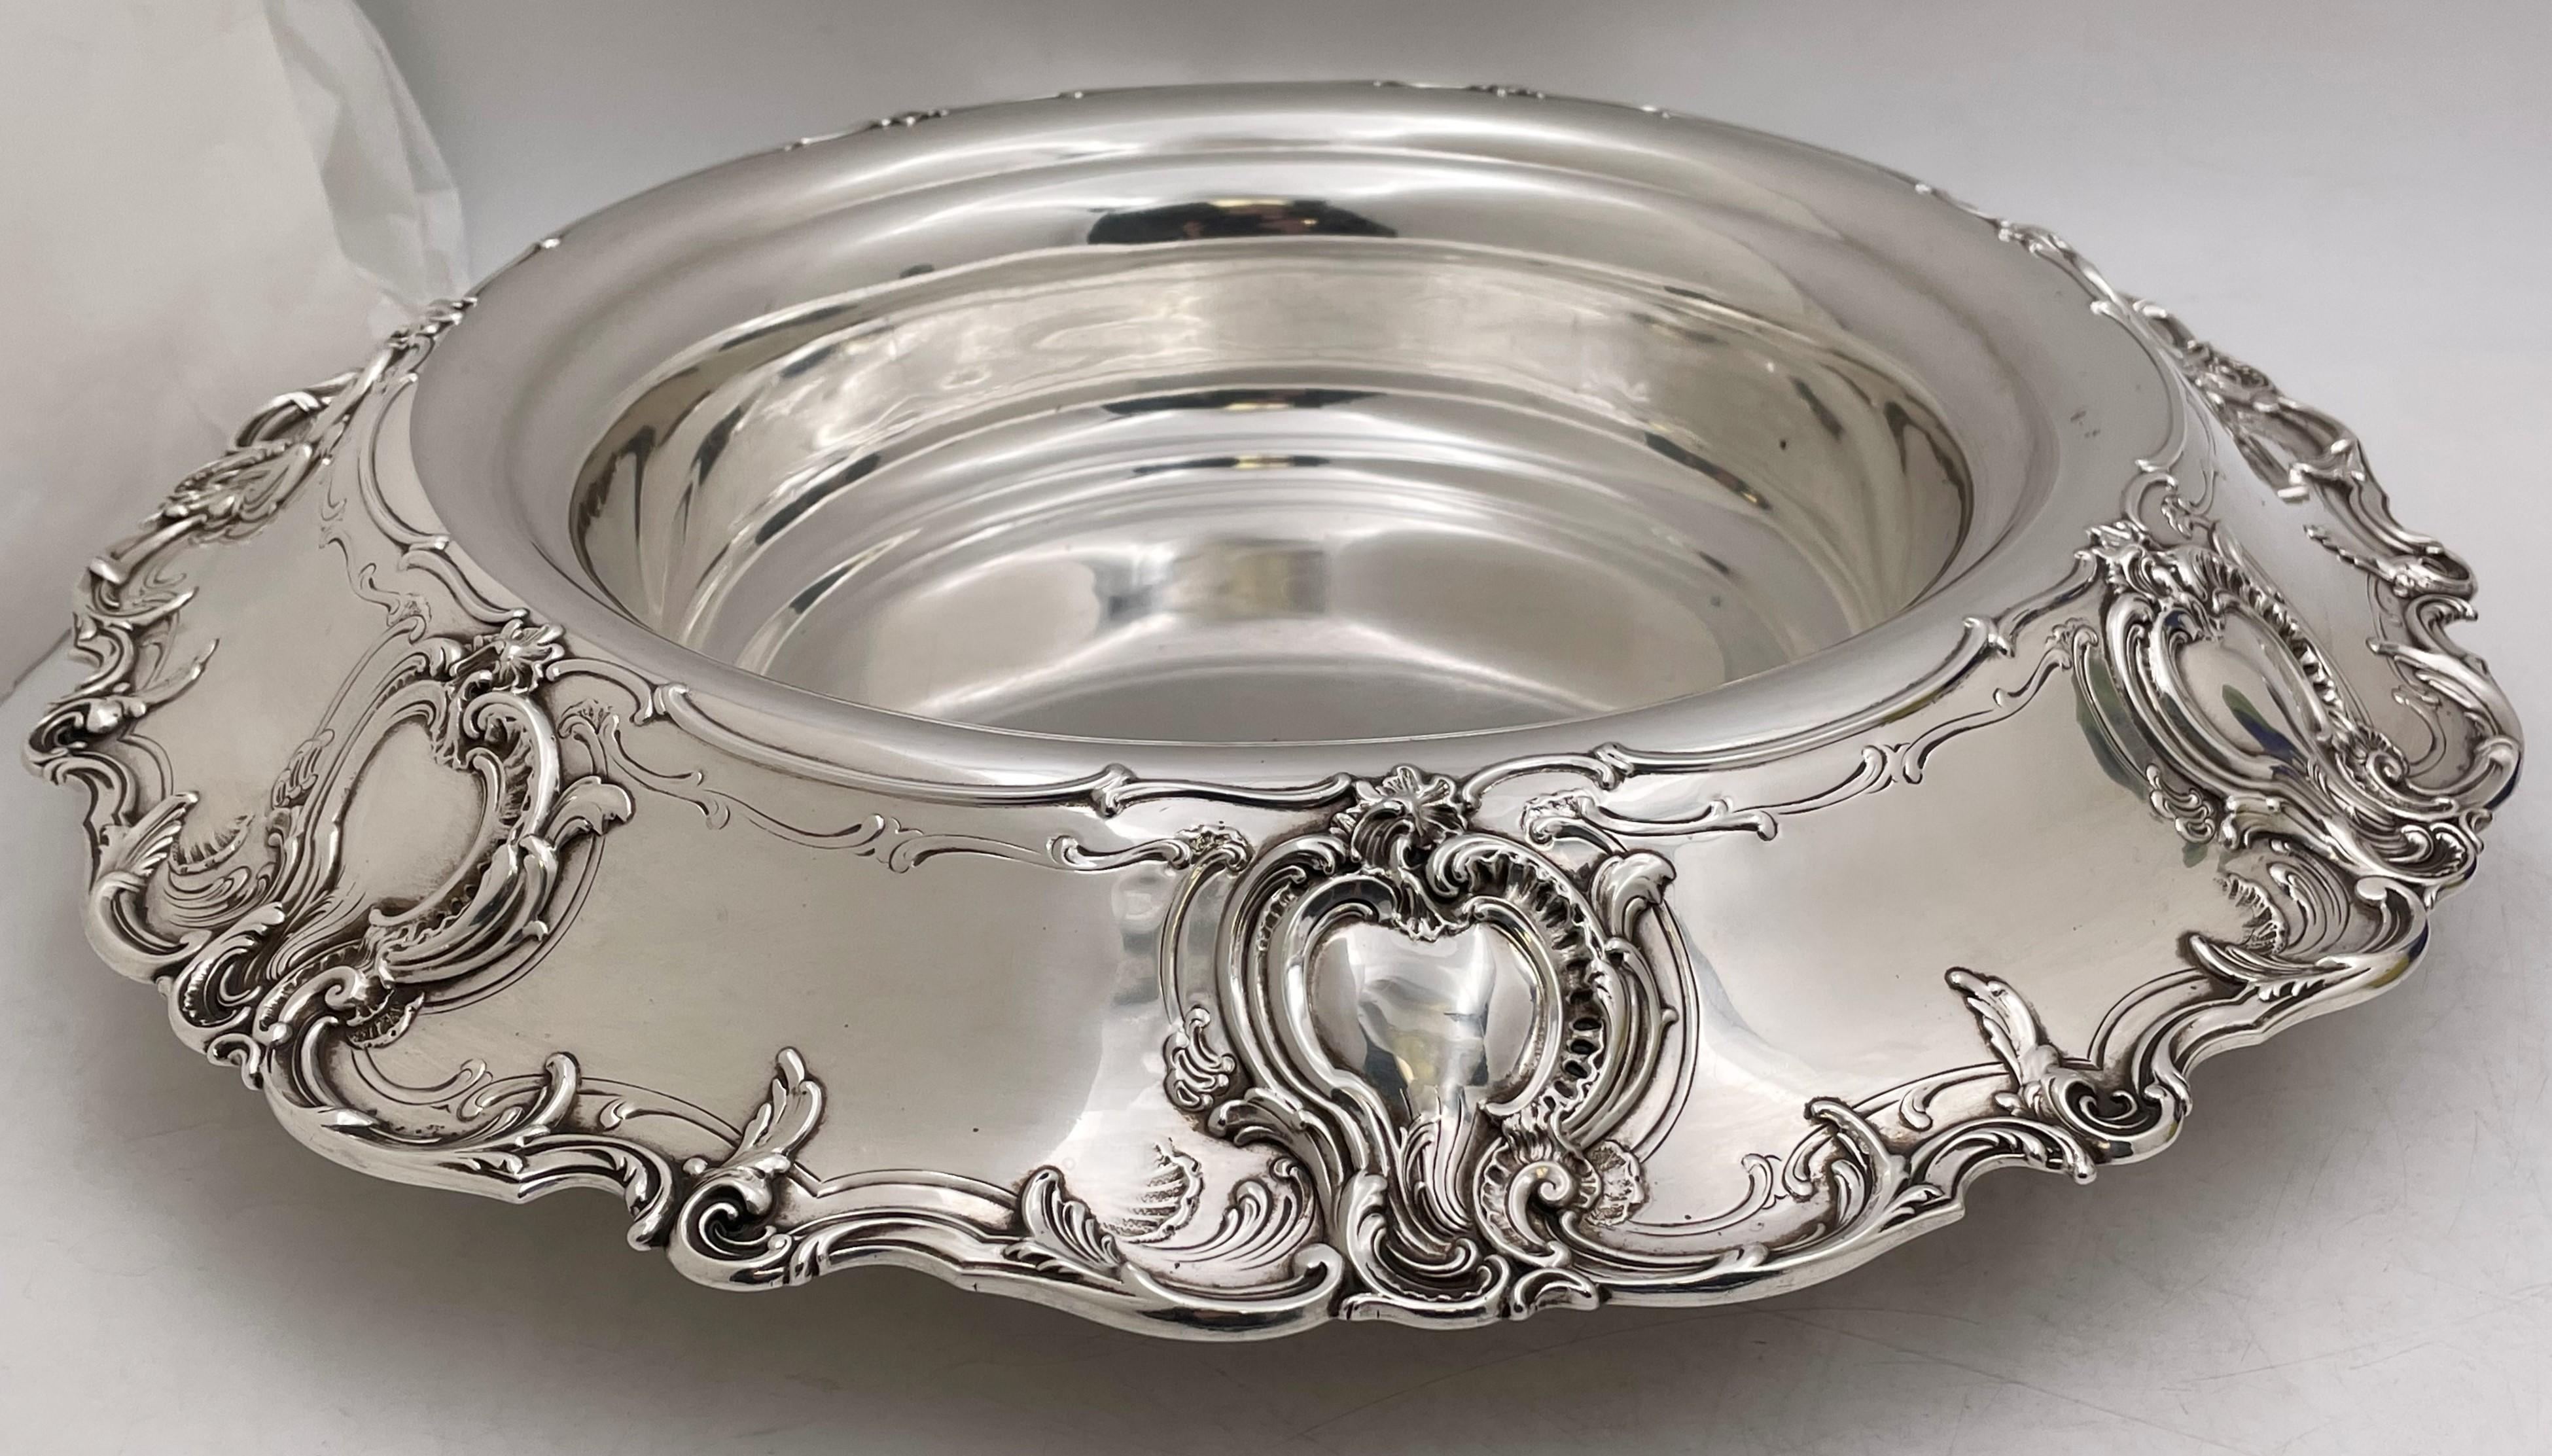 Stunning sterling silver centerpiece bowl by Tiffany & Co. in Kings pattern from 1914. Designed with a turned over rim, decorated with a foliate scroll border and cartouches. Measuring 17” in diameter by 3 ¾” in height and 68 troy ounces. Bearing